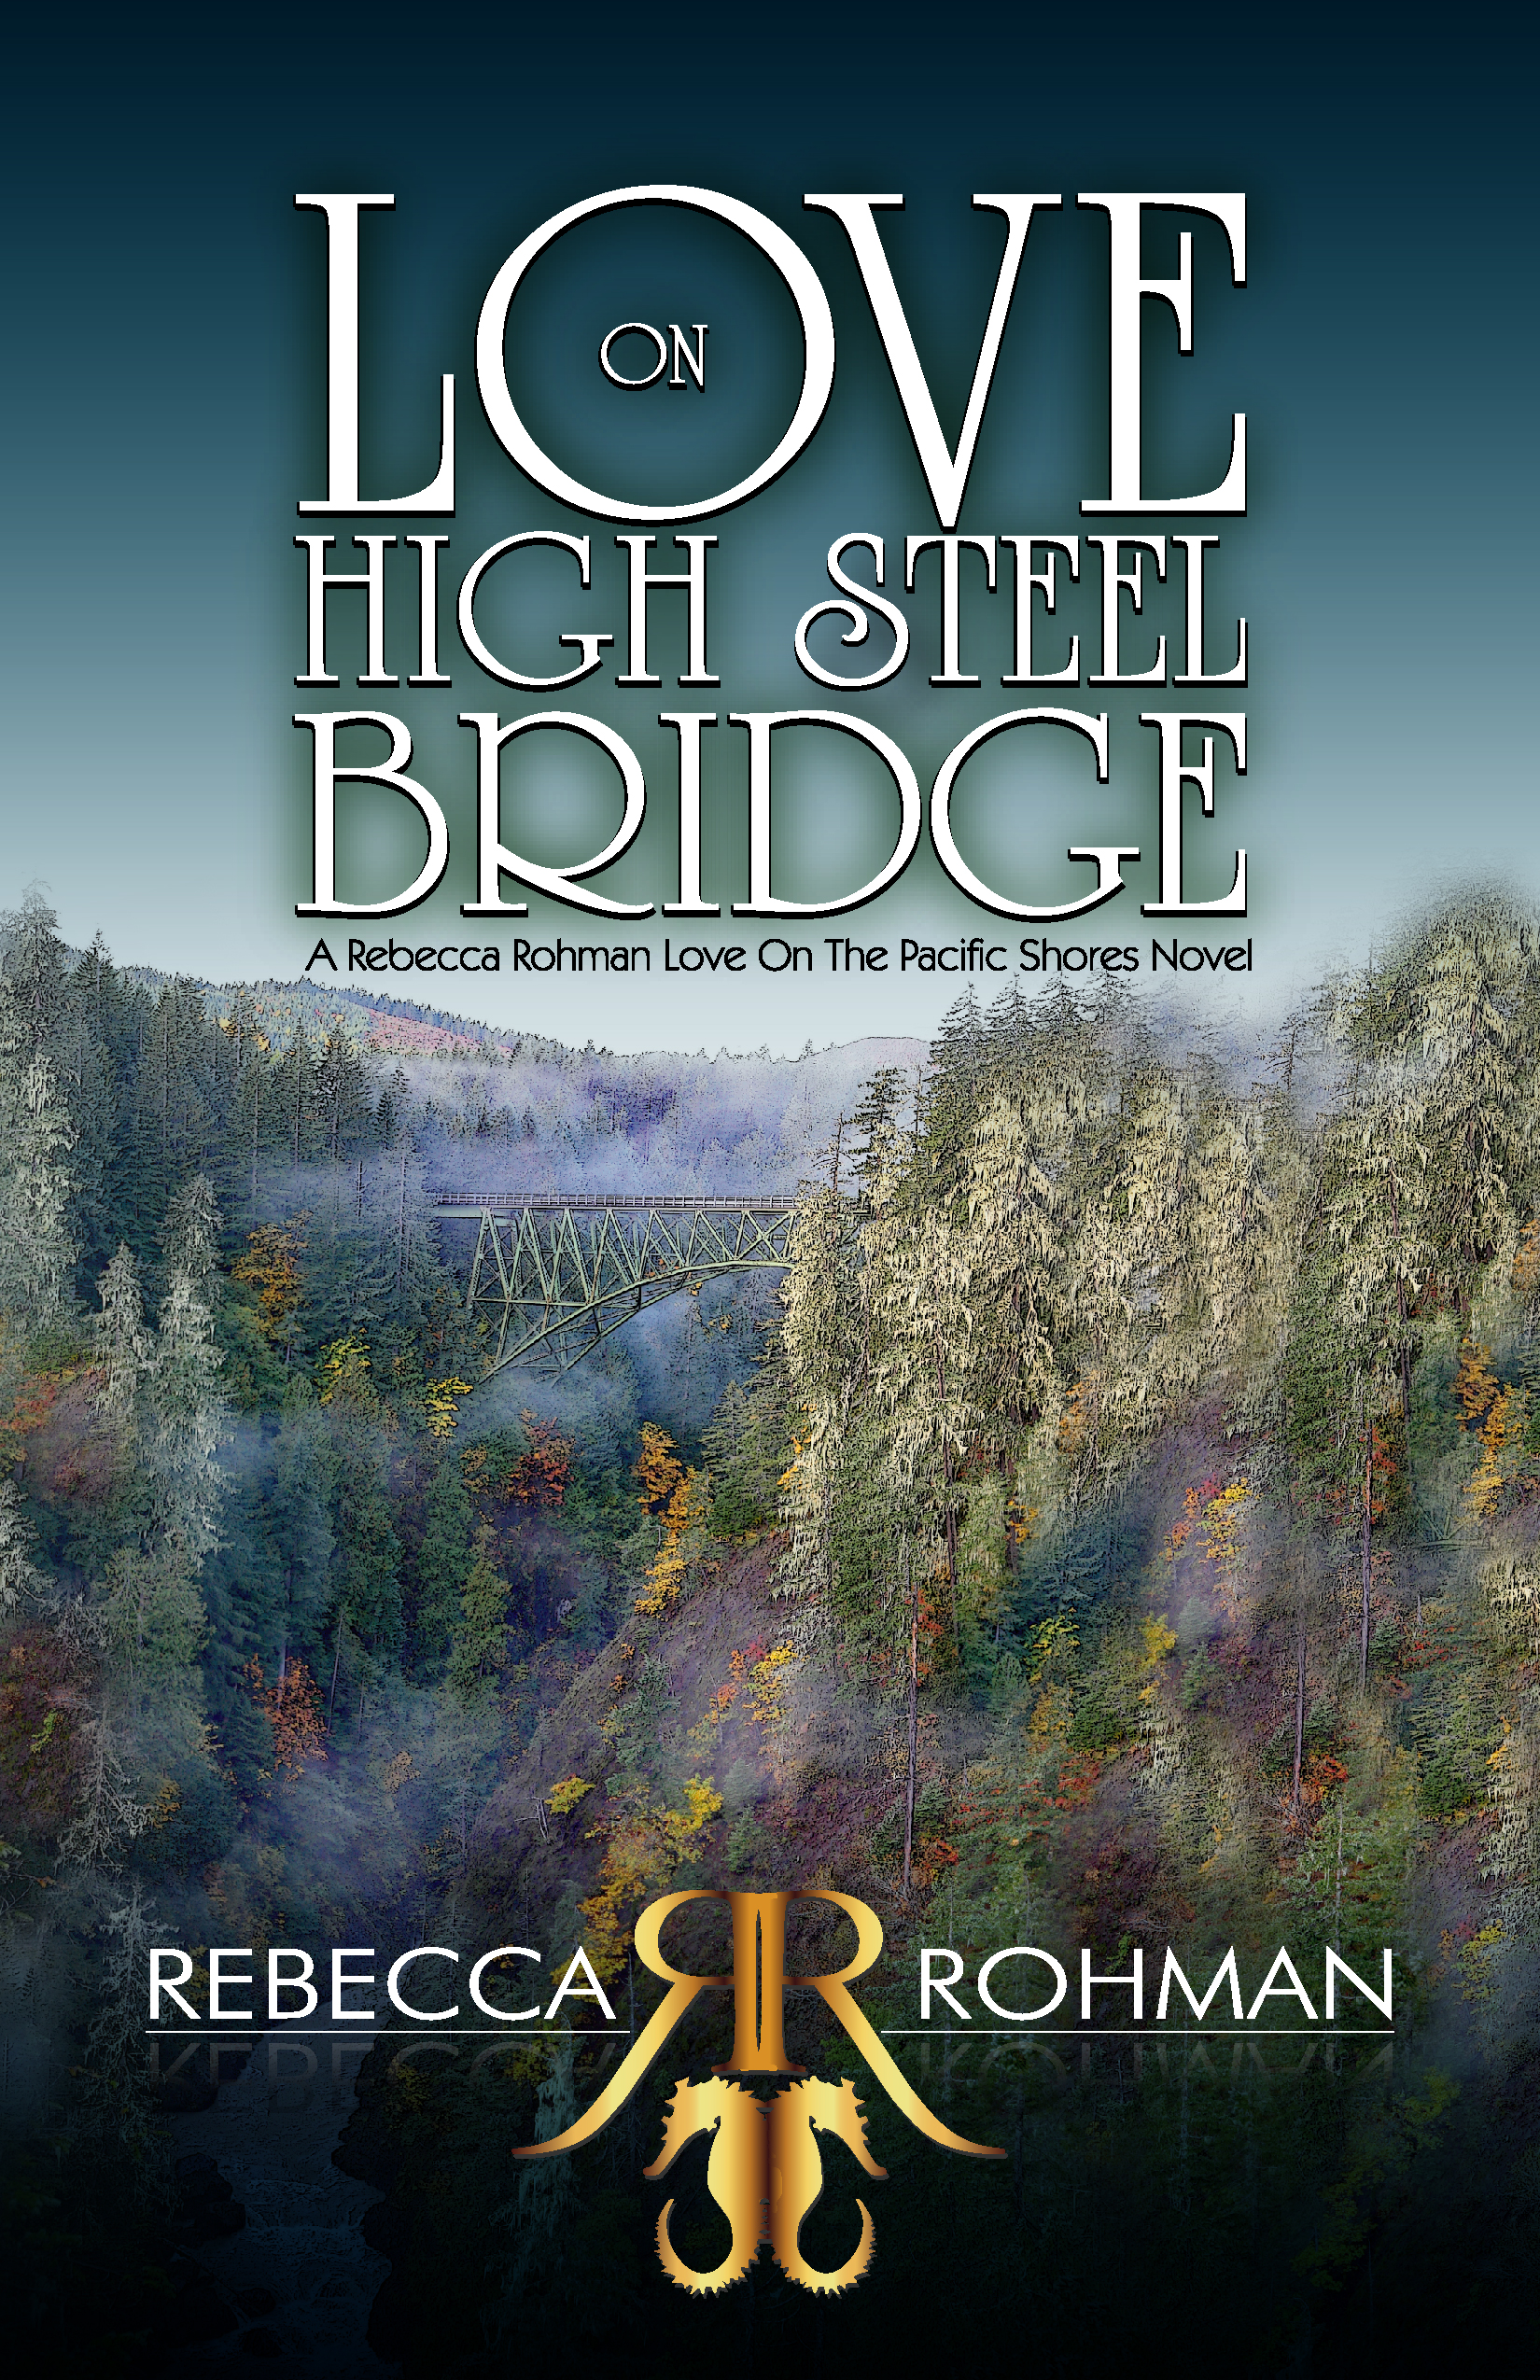 Love On High Steel Bridge Autographed Paperback - NEW COVER